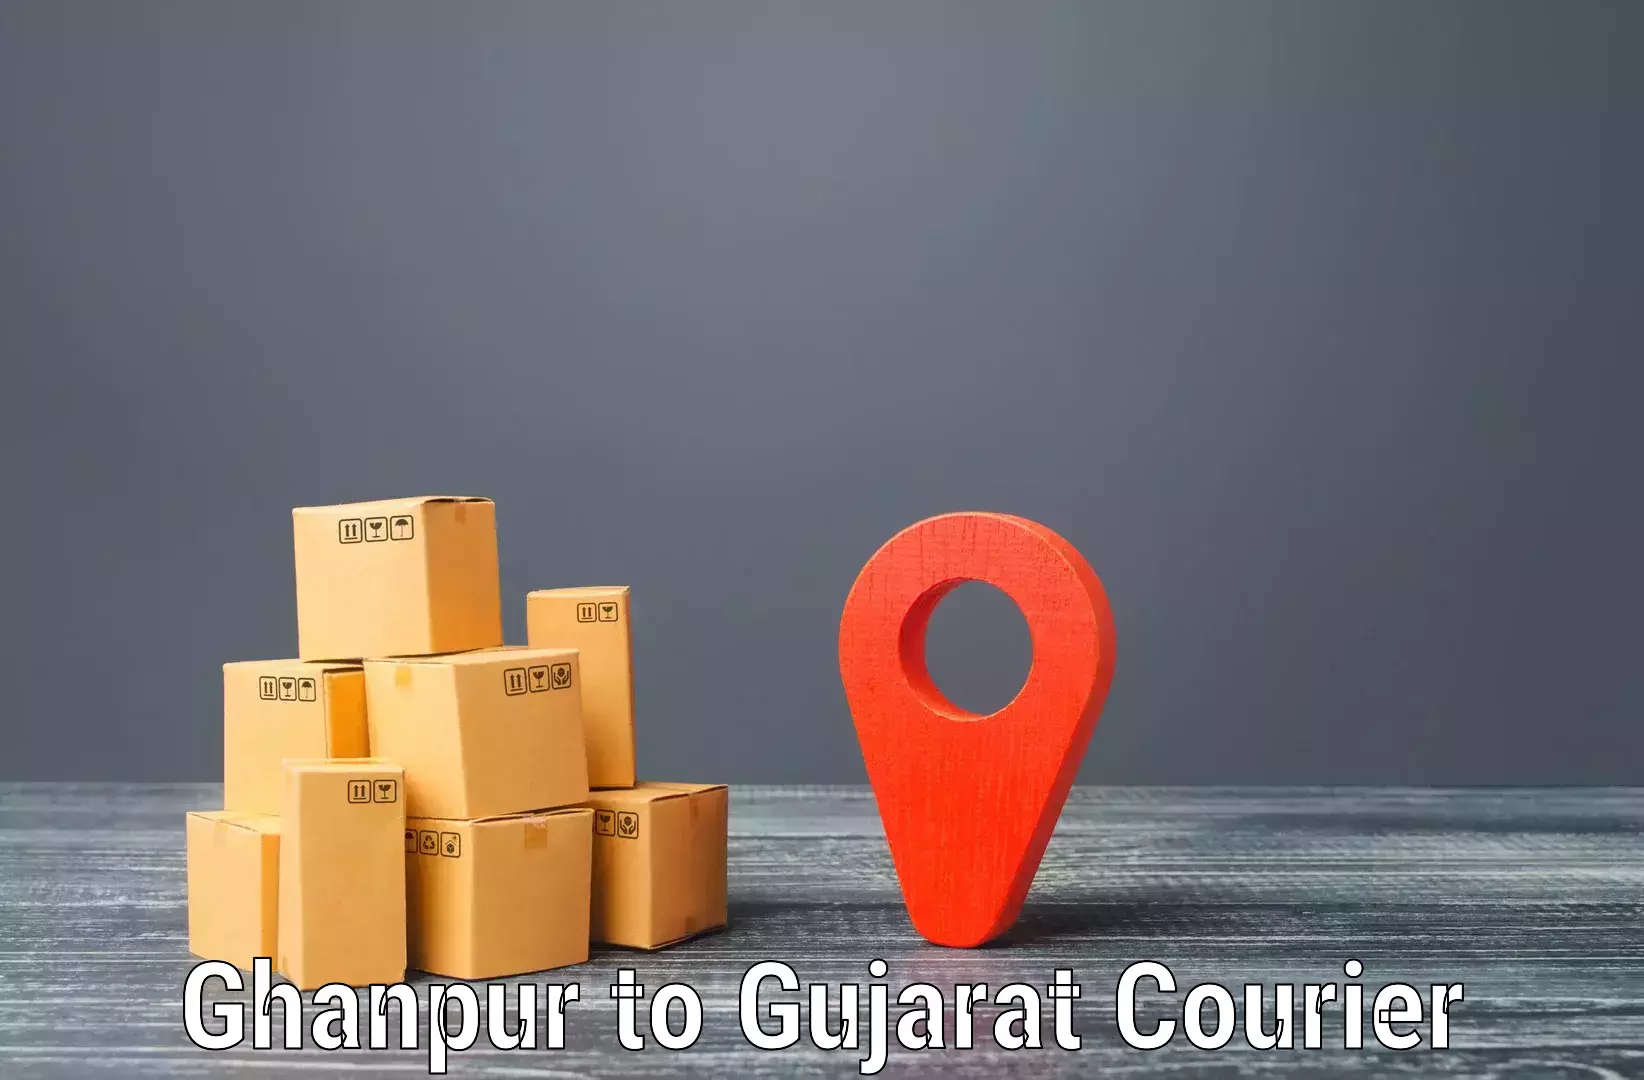 Reliable courier services Ghanpur to Vatadara